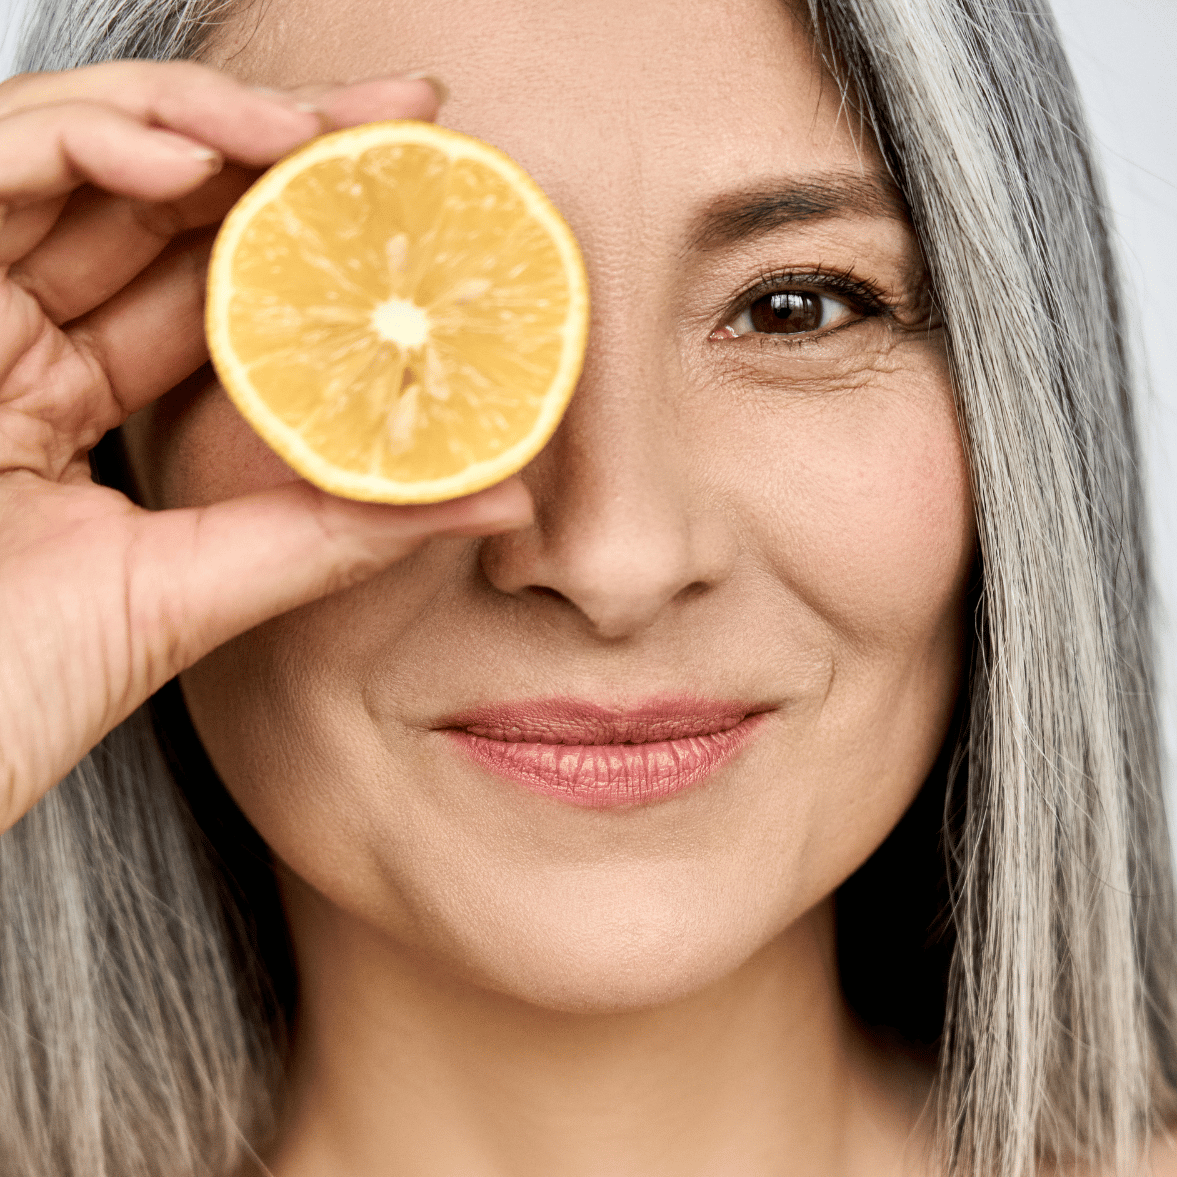 9 Foods That Are Good For Skin And Hair As You Age